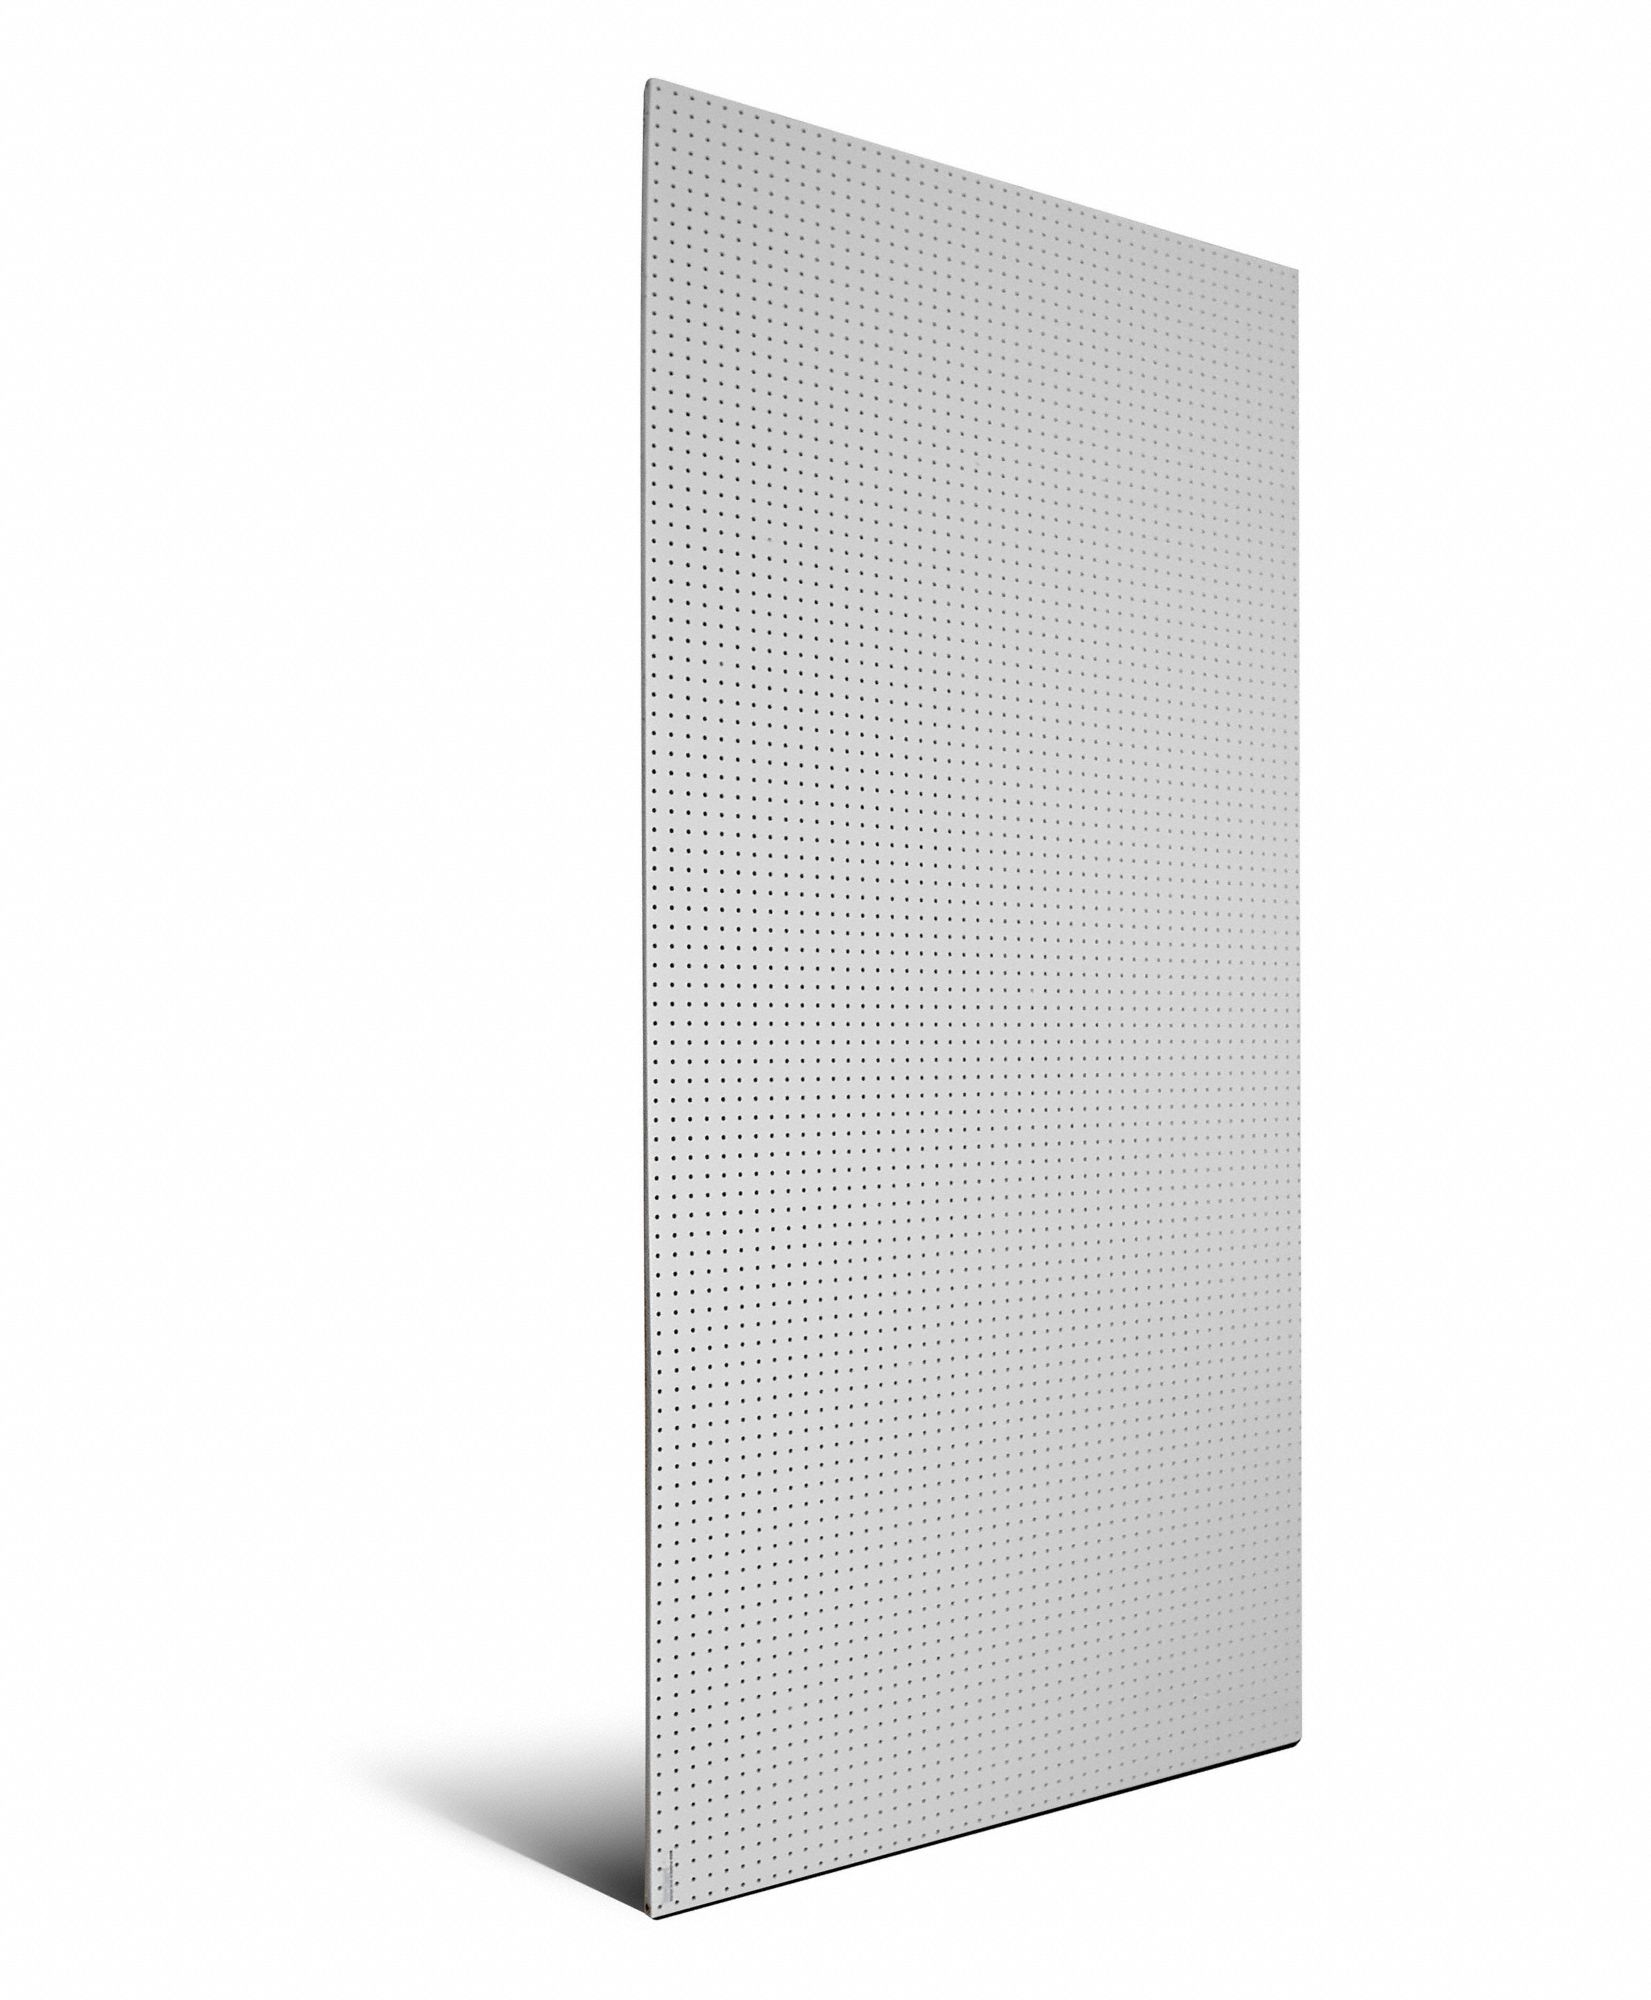 Pegboard Panel: Round, 9/32 in Peg Hole Size, 96 in x 48 in x 1/8 in, Polypropylene, White